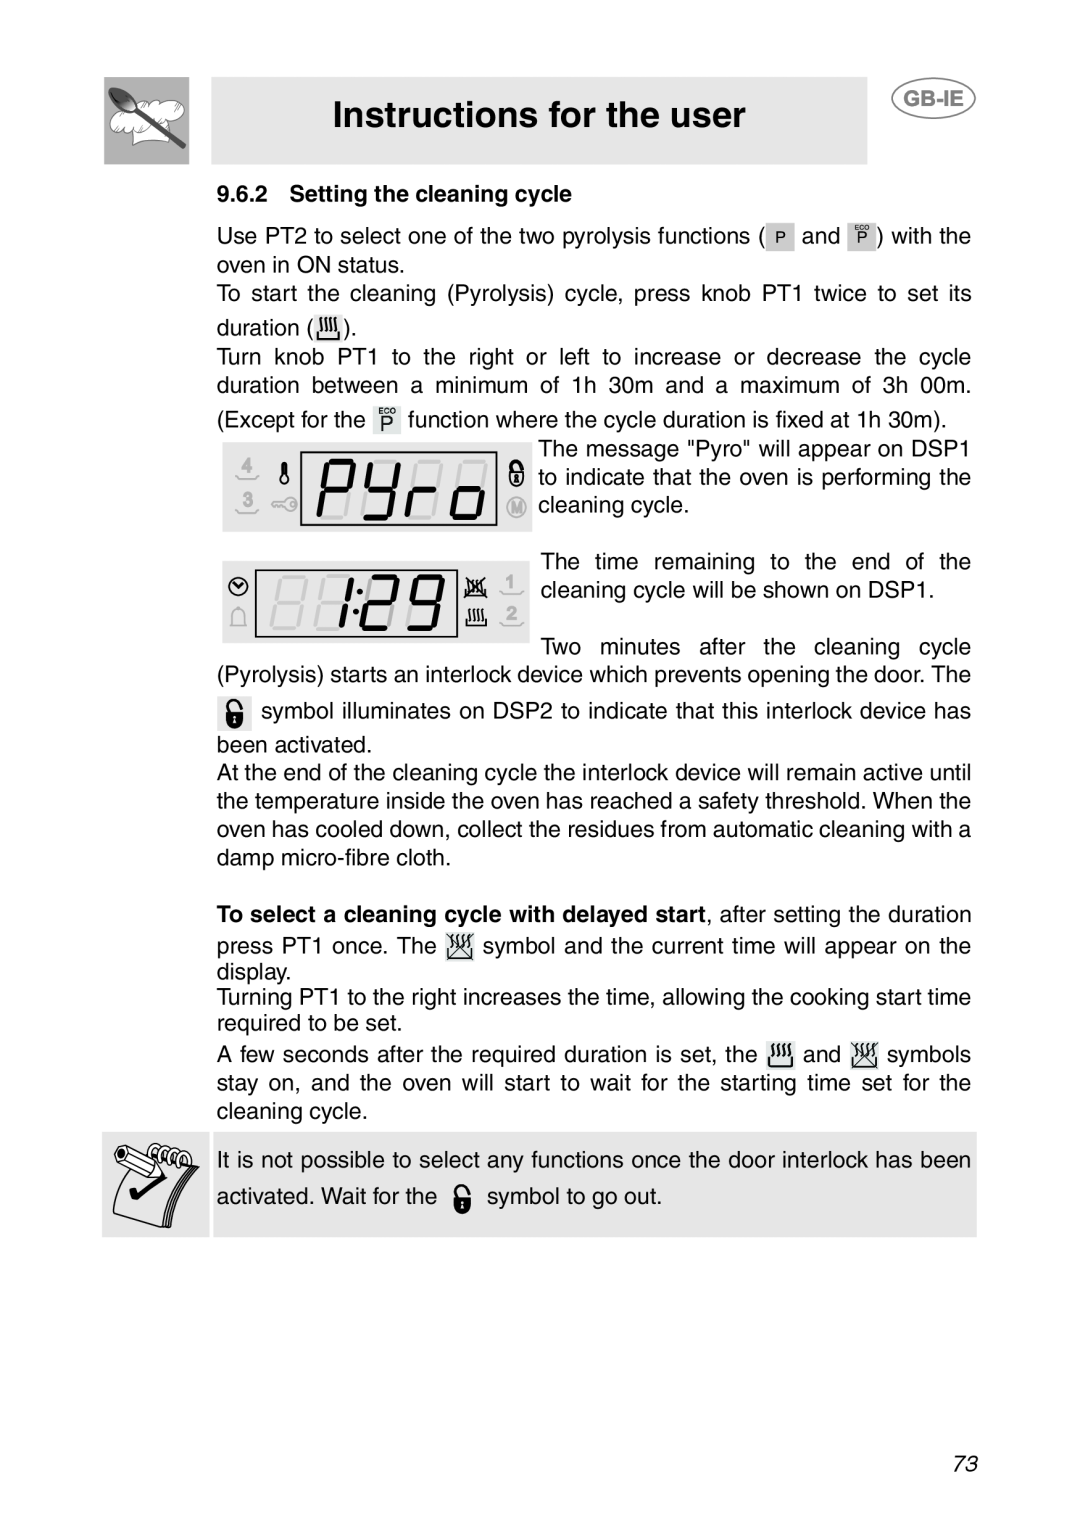 Smeg SC112-2 manual Setting the cleaning cycle, Instructions for the user, The message Pyro will appear on DSP1 